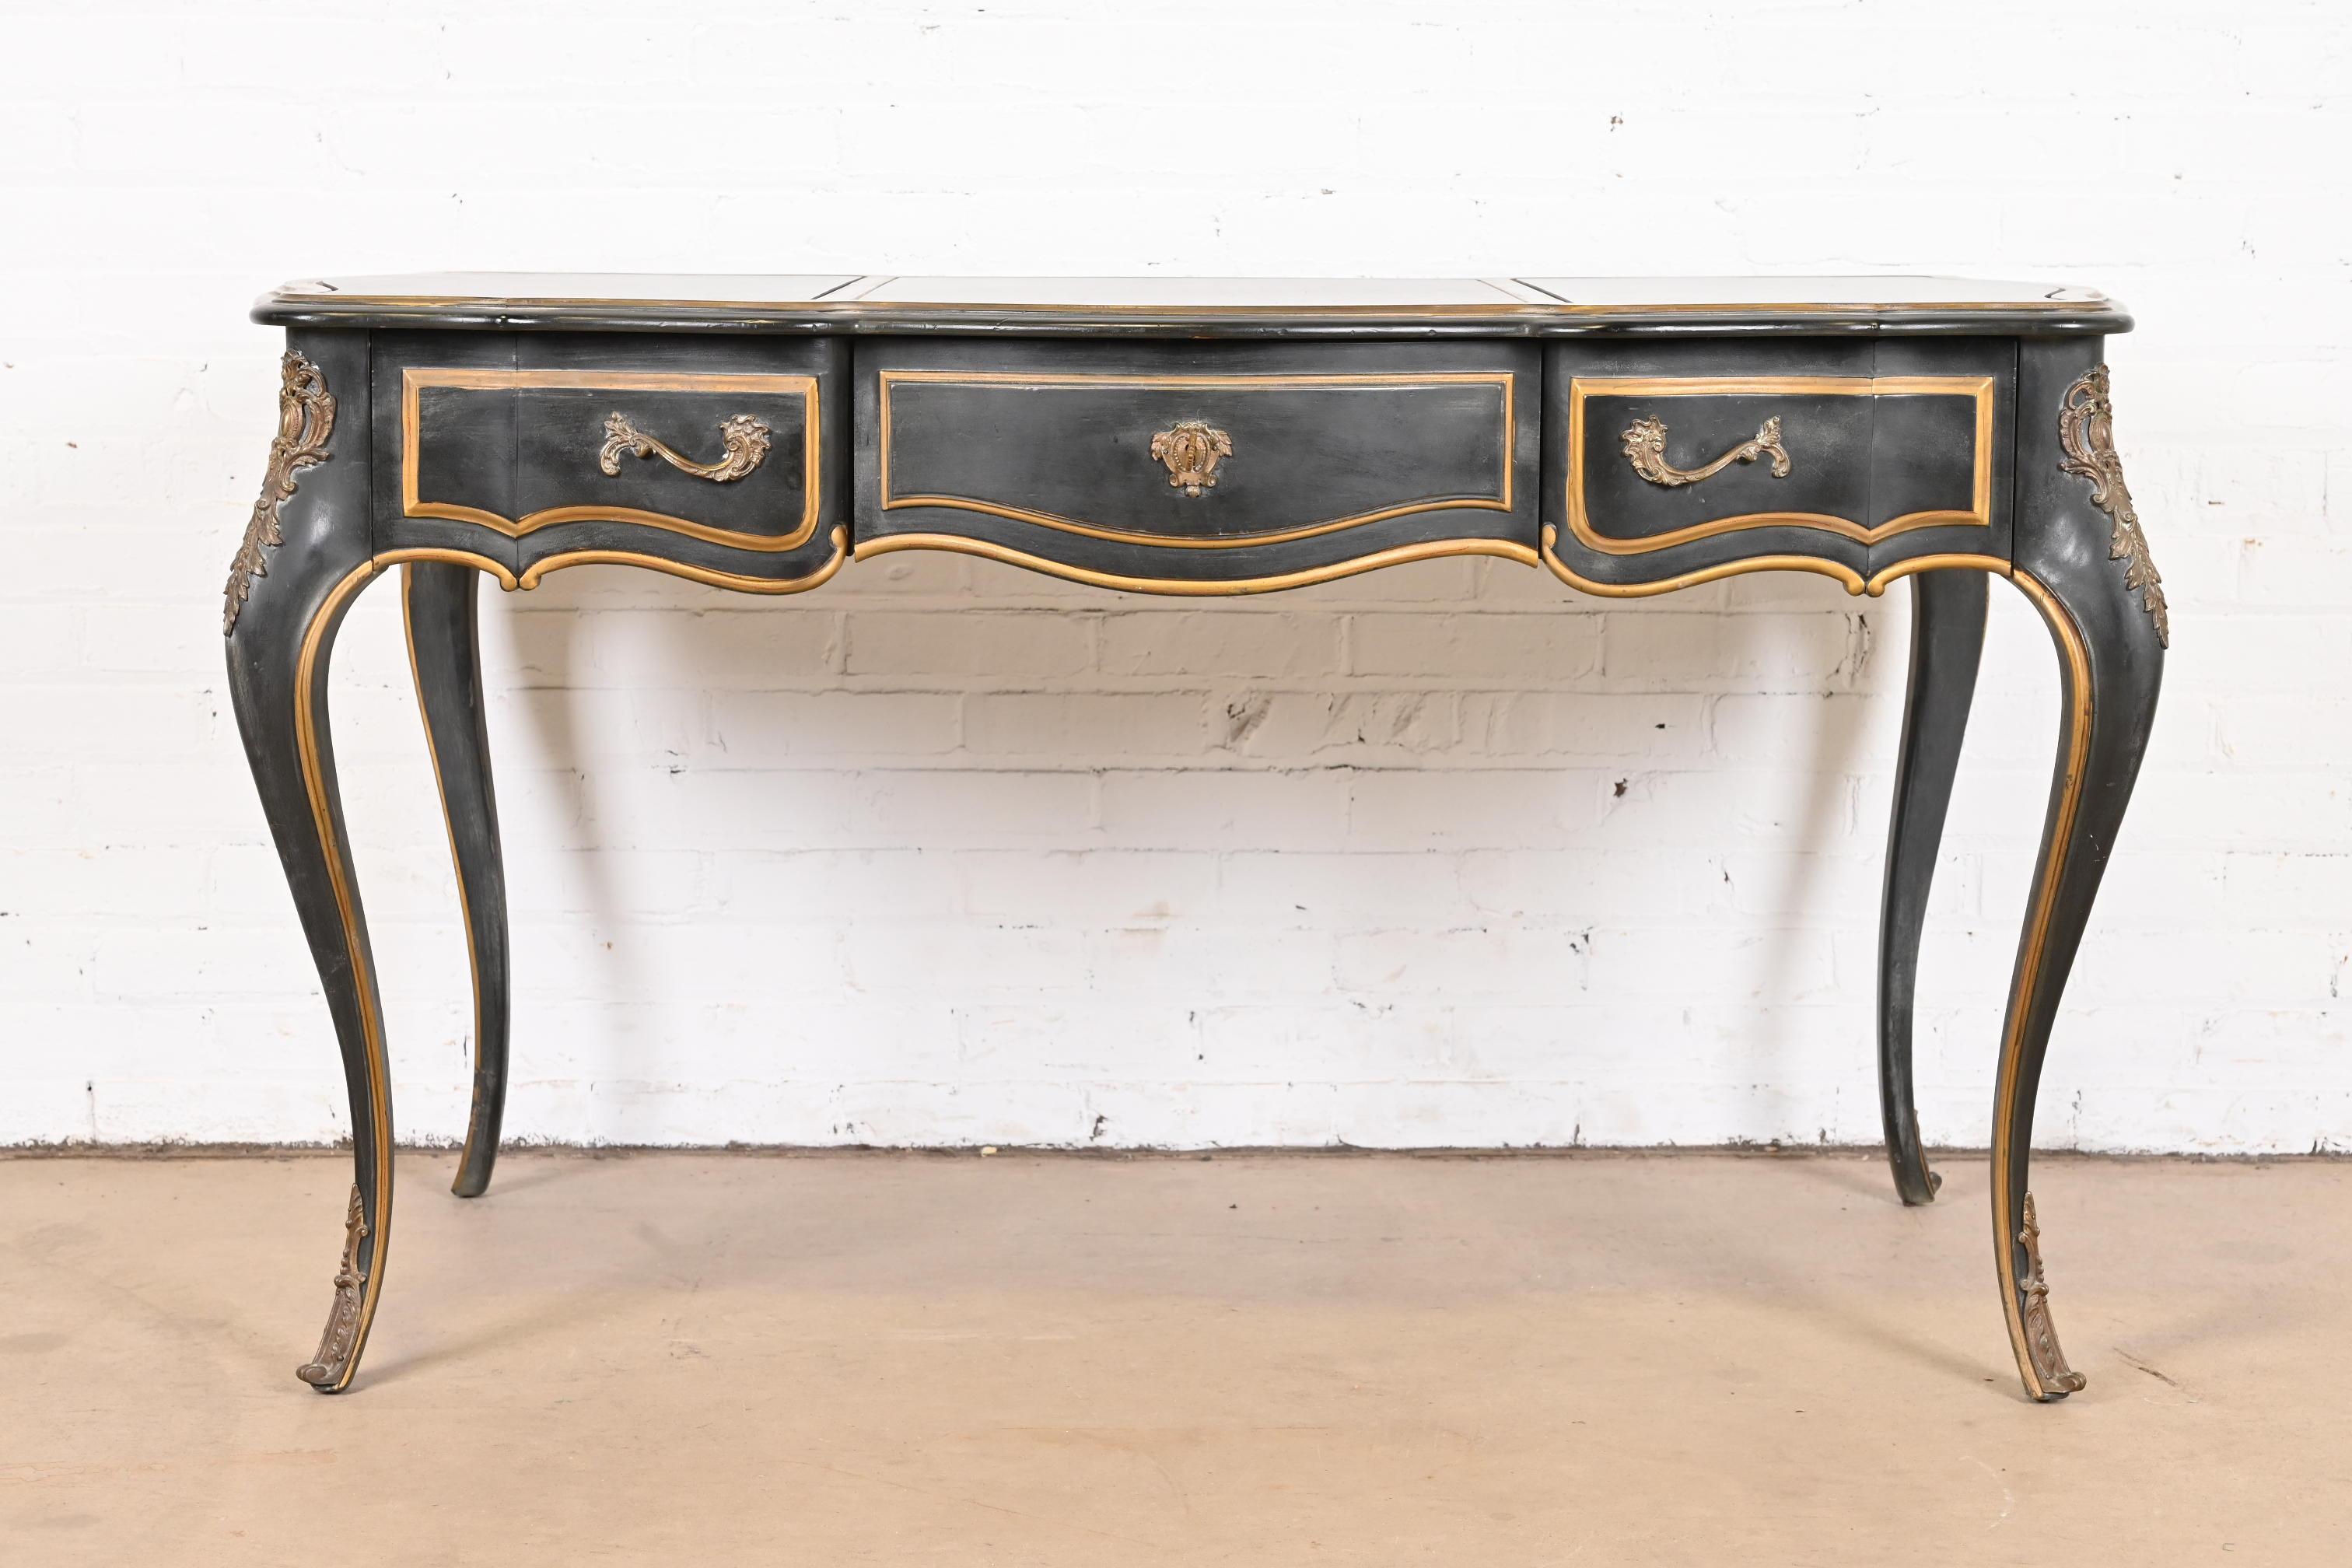 American French Louis XV Bureau Plat Desk with Ormolu and Faux Marble Top by Drexel